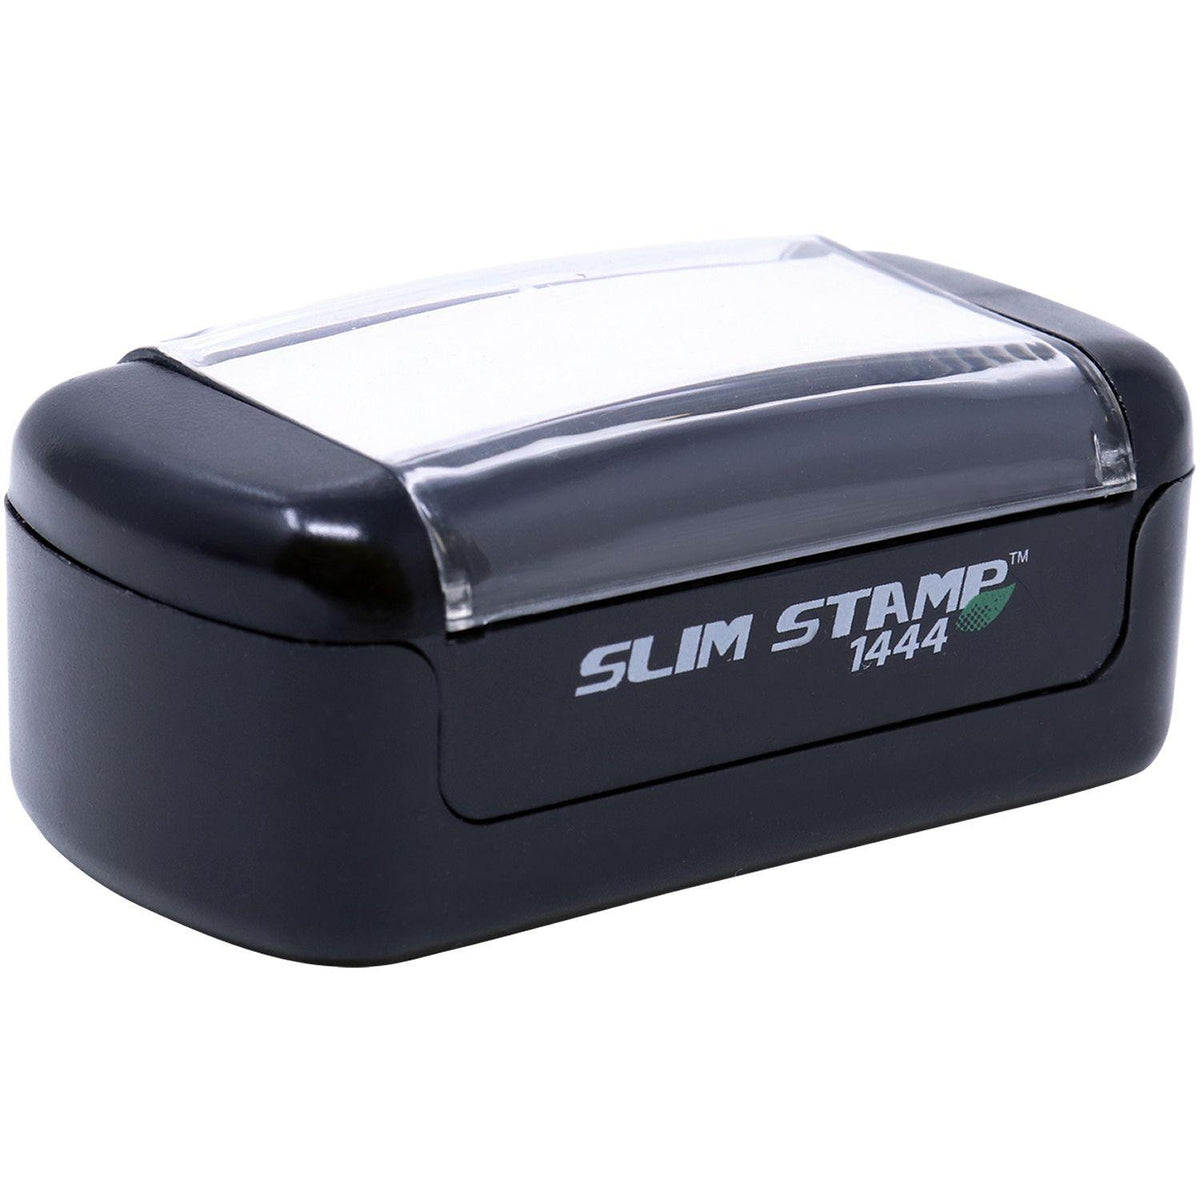 Alt View of Slim Pre-Inked Parcel Post Air Stamp Mount Angle